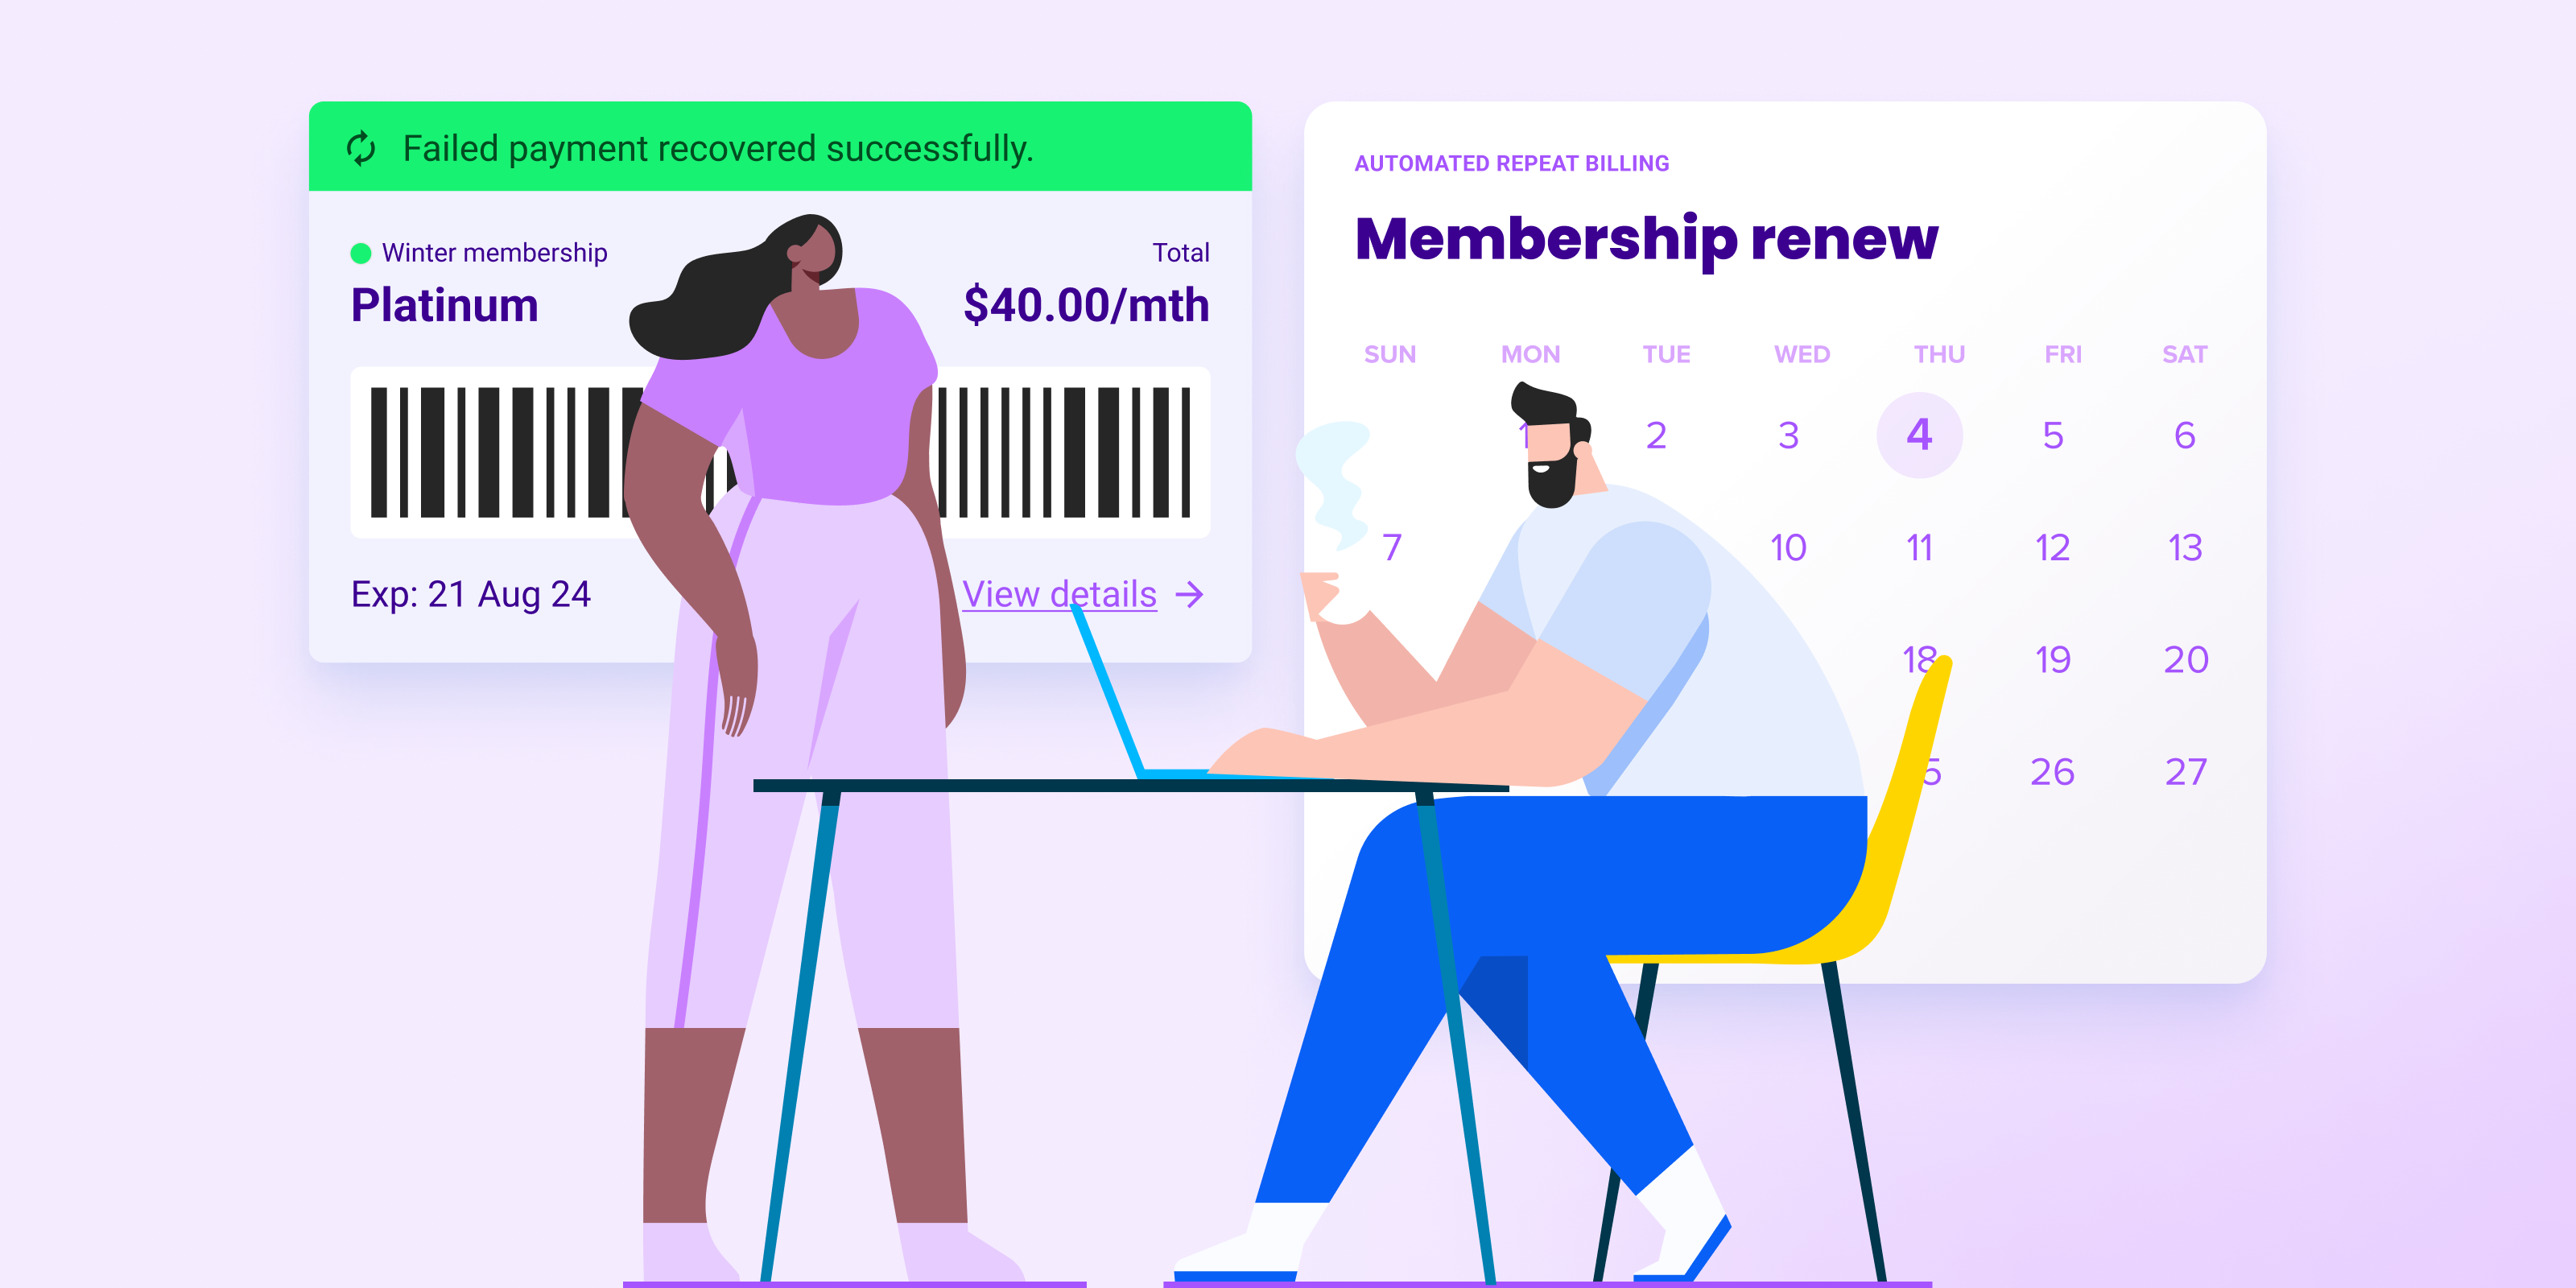 How to Reduce Failed Membership Payments